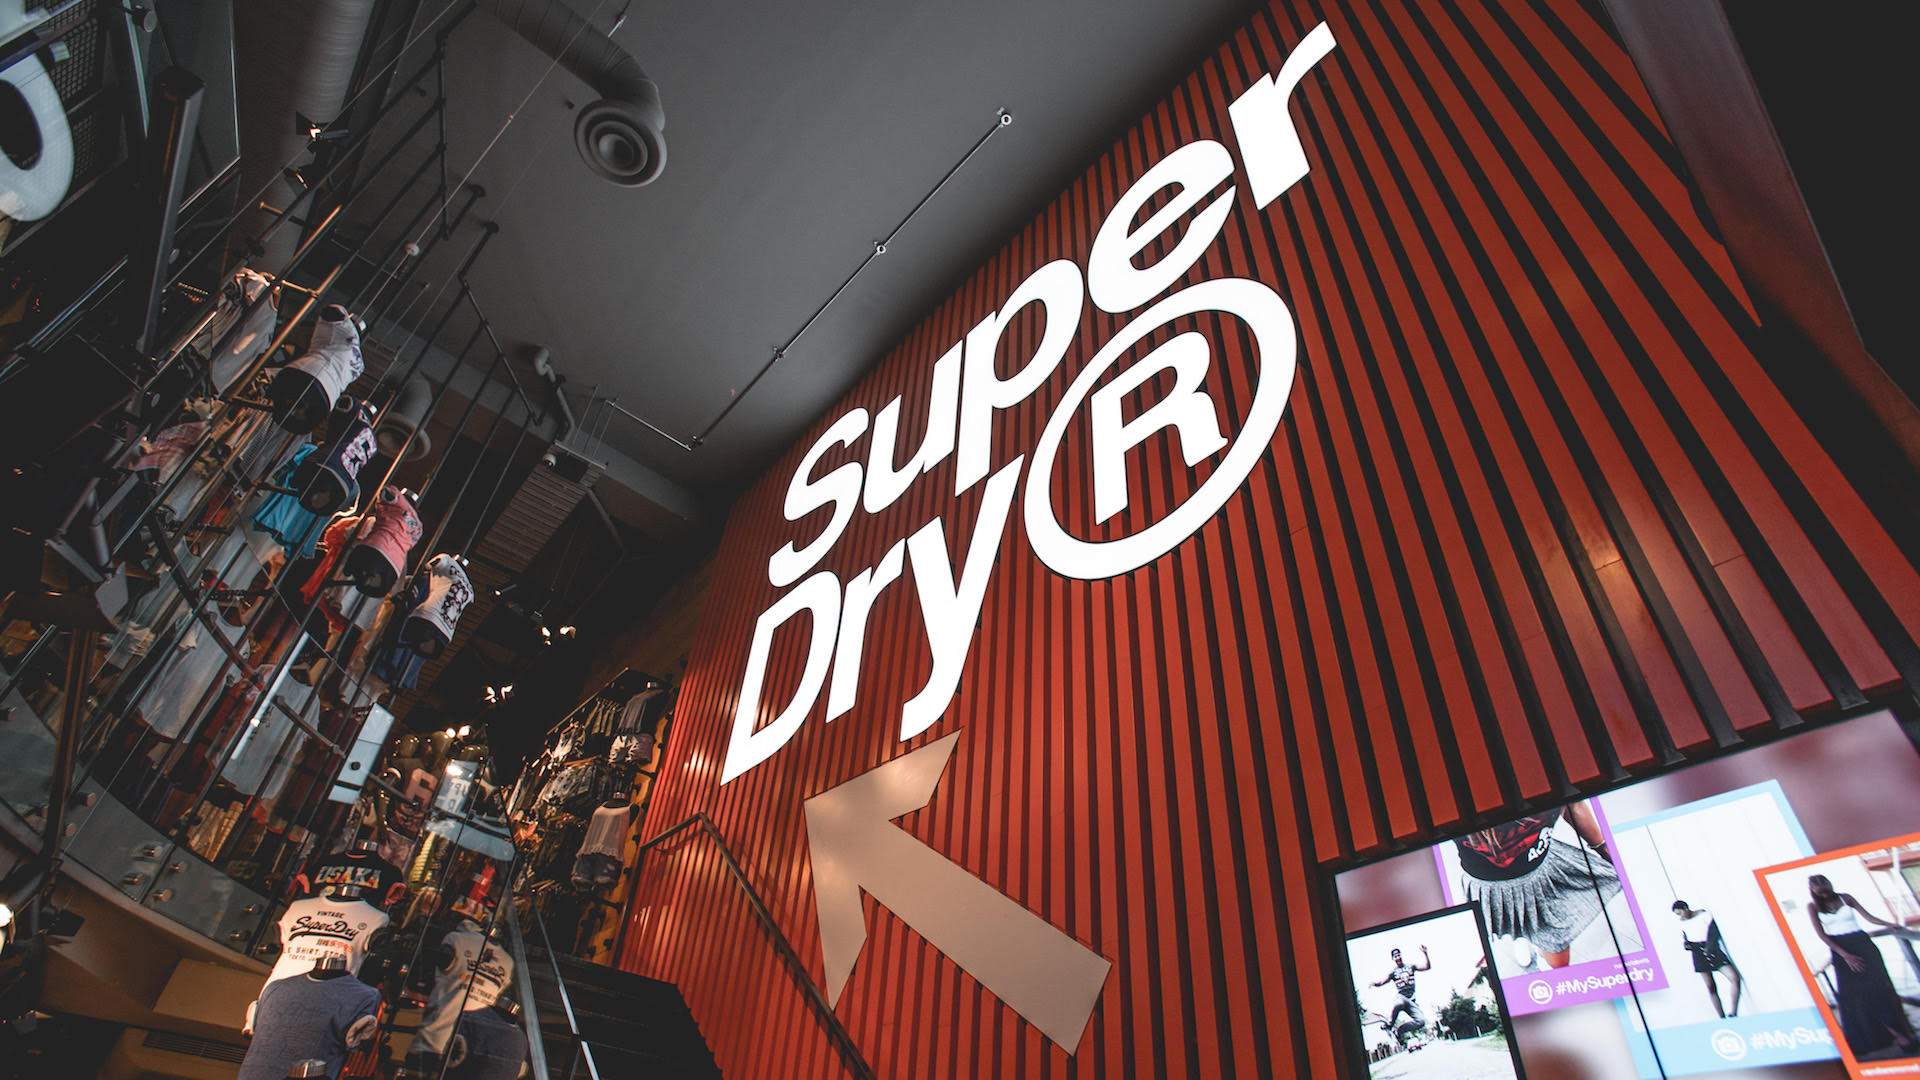 We're Giving Away $500 to Spend at Auckland's New Superdry Store